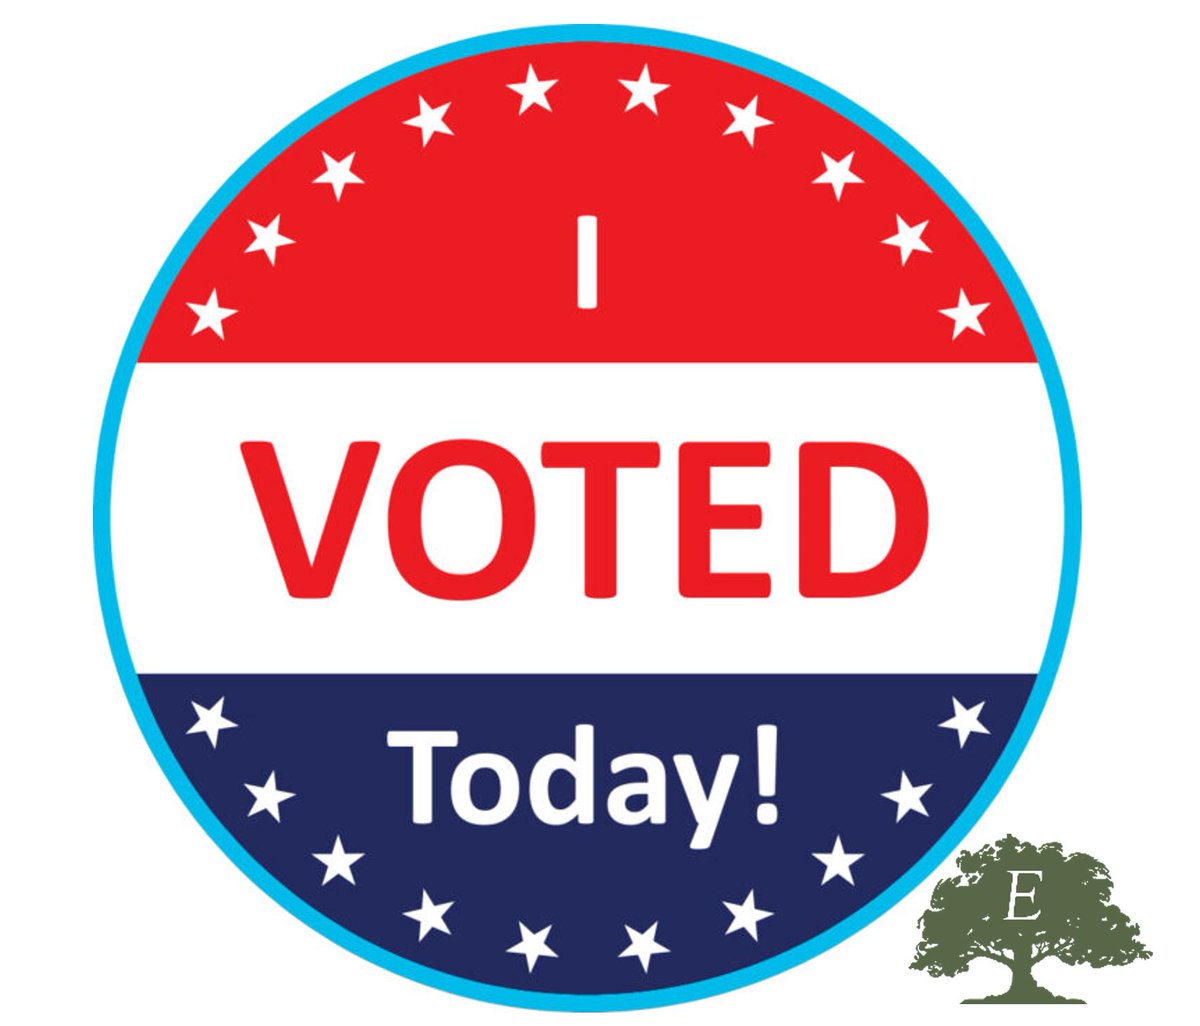 Hope you did today too - every vote counts!
#vote2022 #votingday #makesuretovote #lovewhatyoudo #peoplematter #itsallaboutmyclients #laurieeickhoff #bre01996594